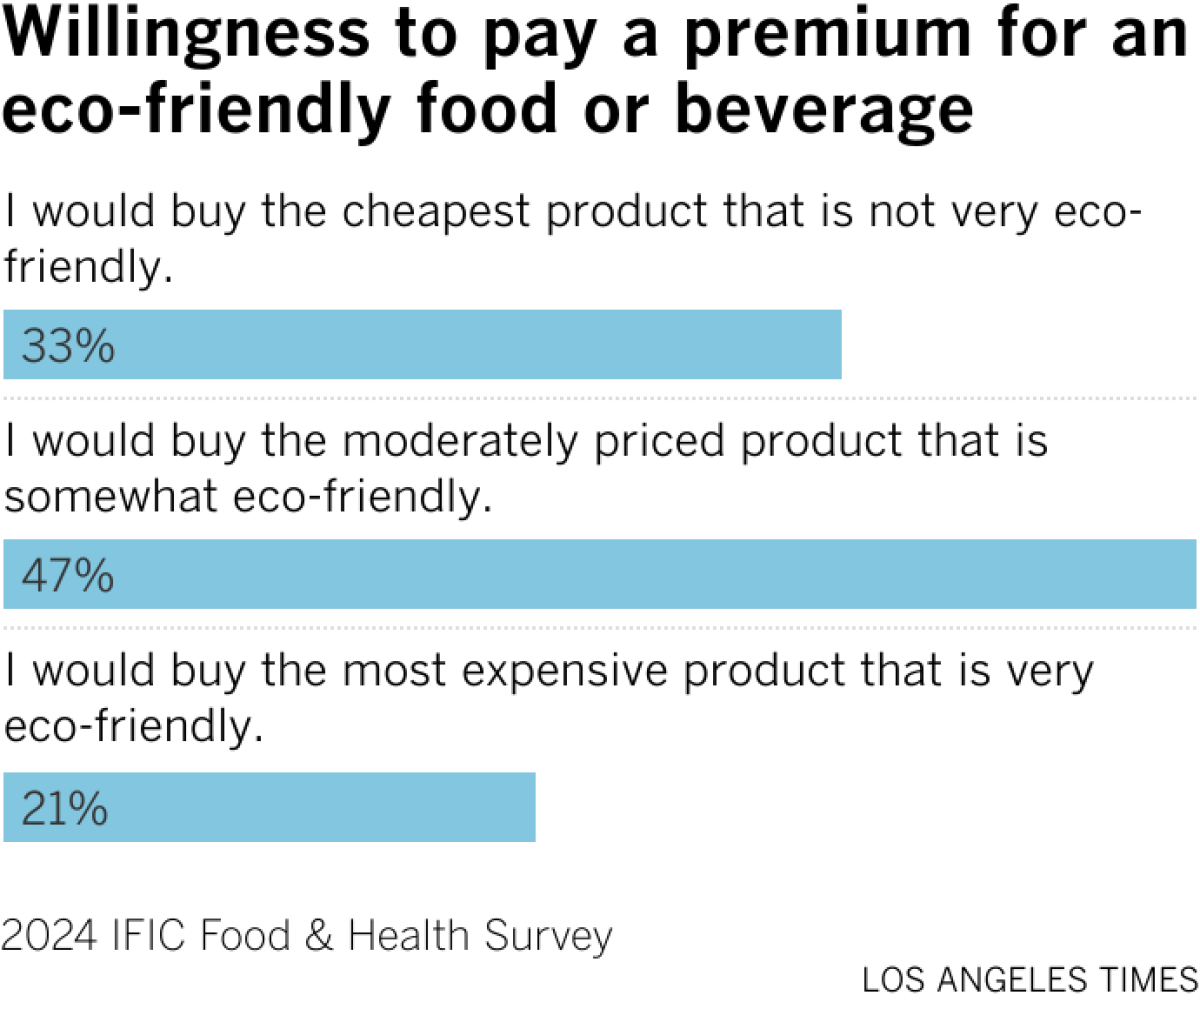 Willingness to pay a premium for an eco-friendly food or beverage